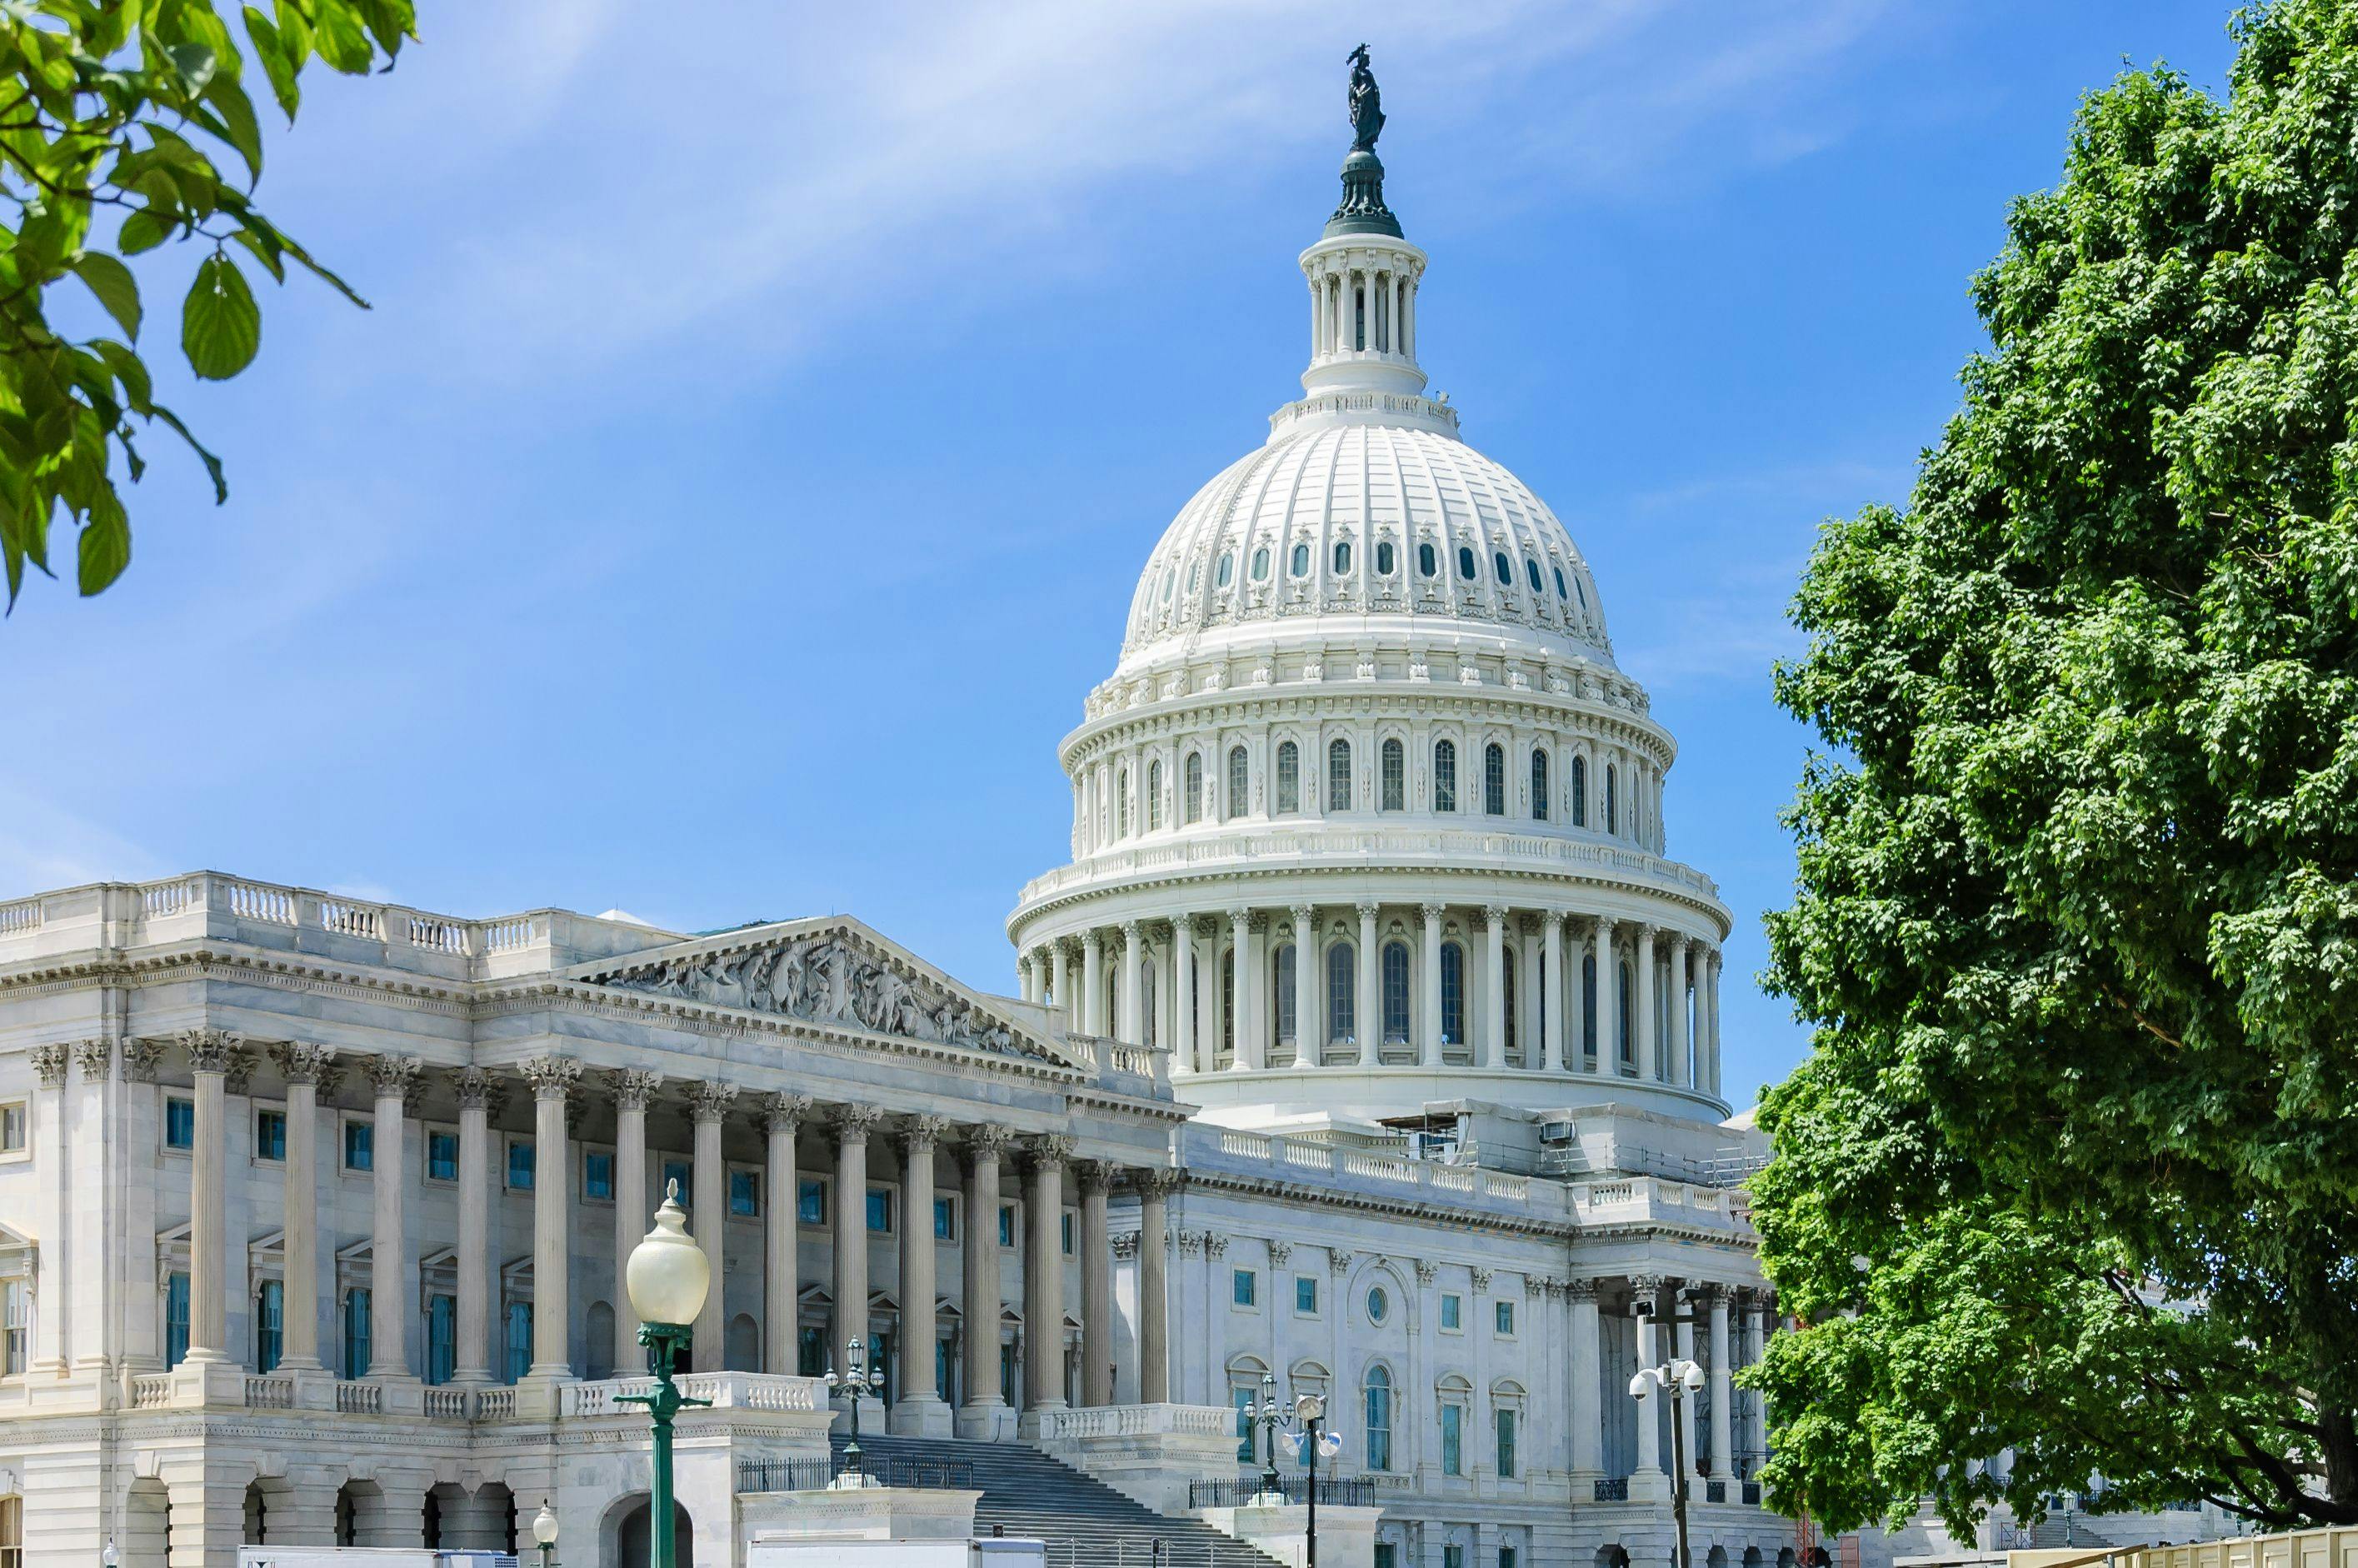 More than 250 hospitals have signed a letter urging Congress to block cuts to a Medicaid program that offers funding to safety-net hospitals. (Image credit: ©Pierrette Guertin - stock.adobe.com)